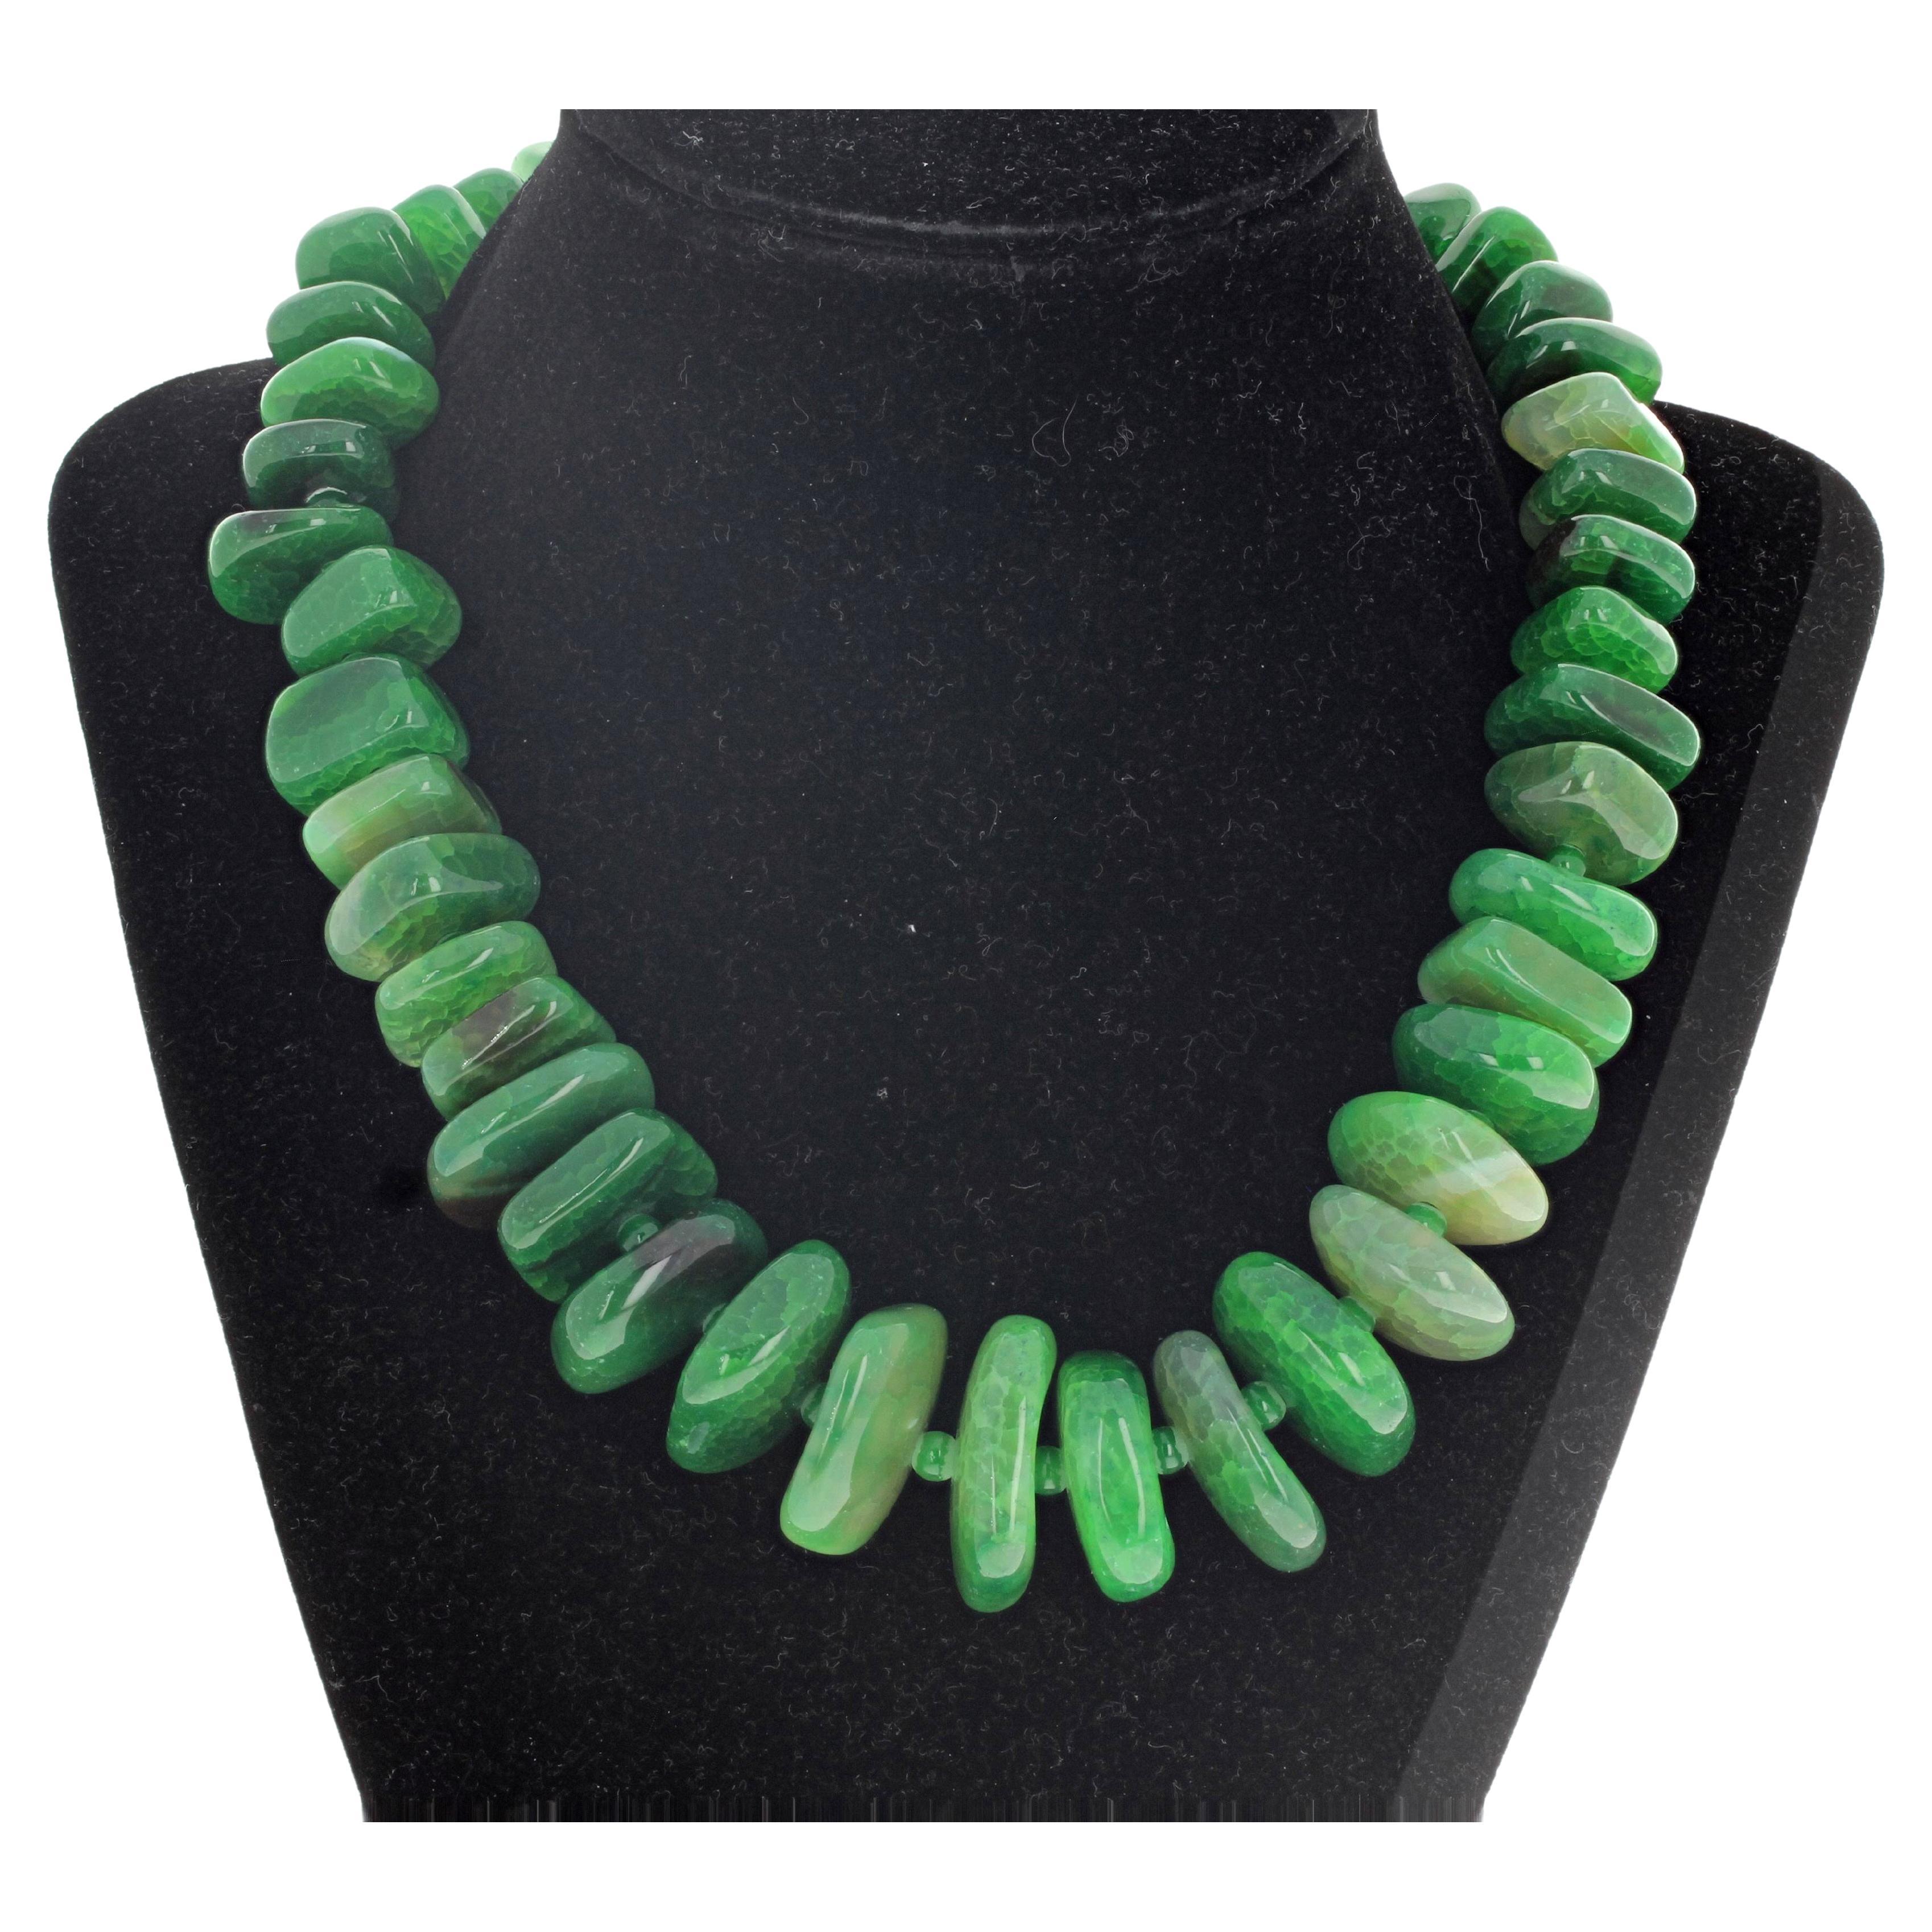 AJD Absolutely Beautiful Green Graduated Natural Irregular Agate Rondel Necklace